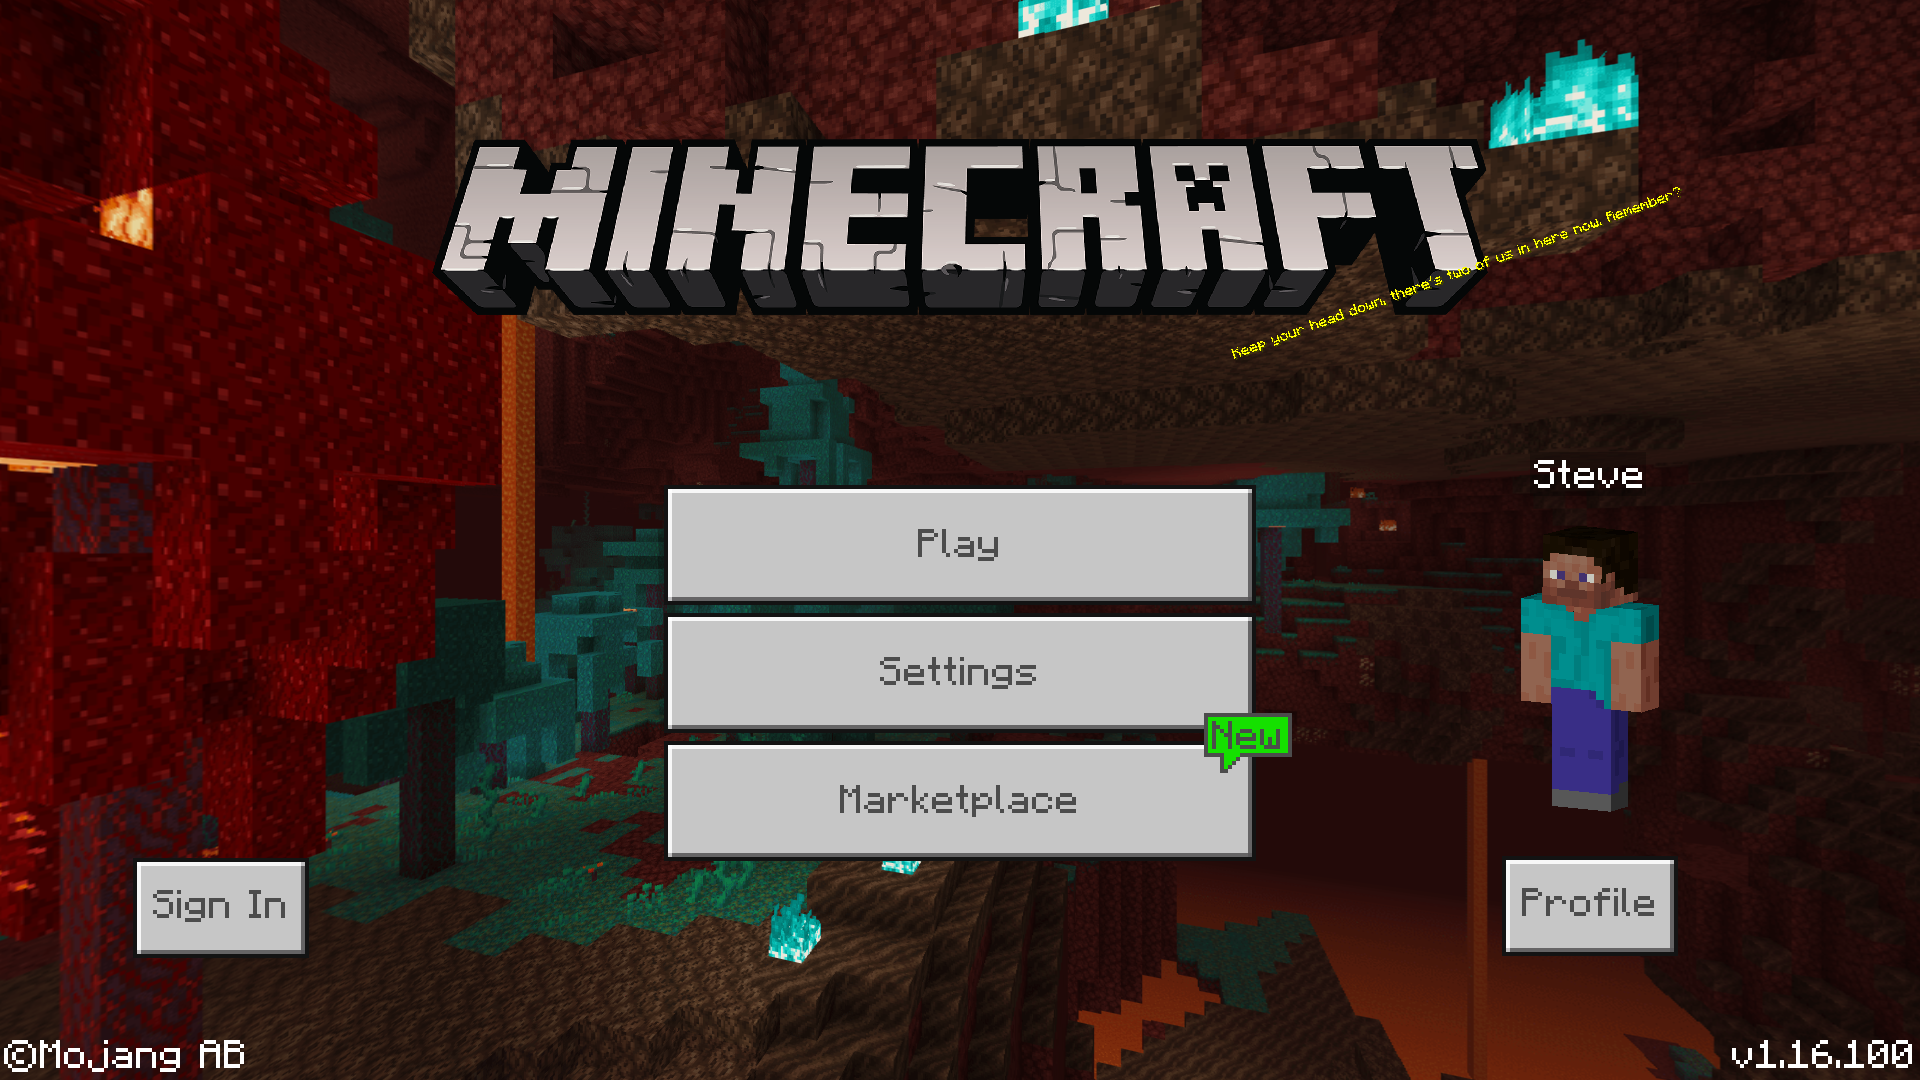 Download Skin Editor 3D for Minecraft PE 1.5.3